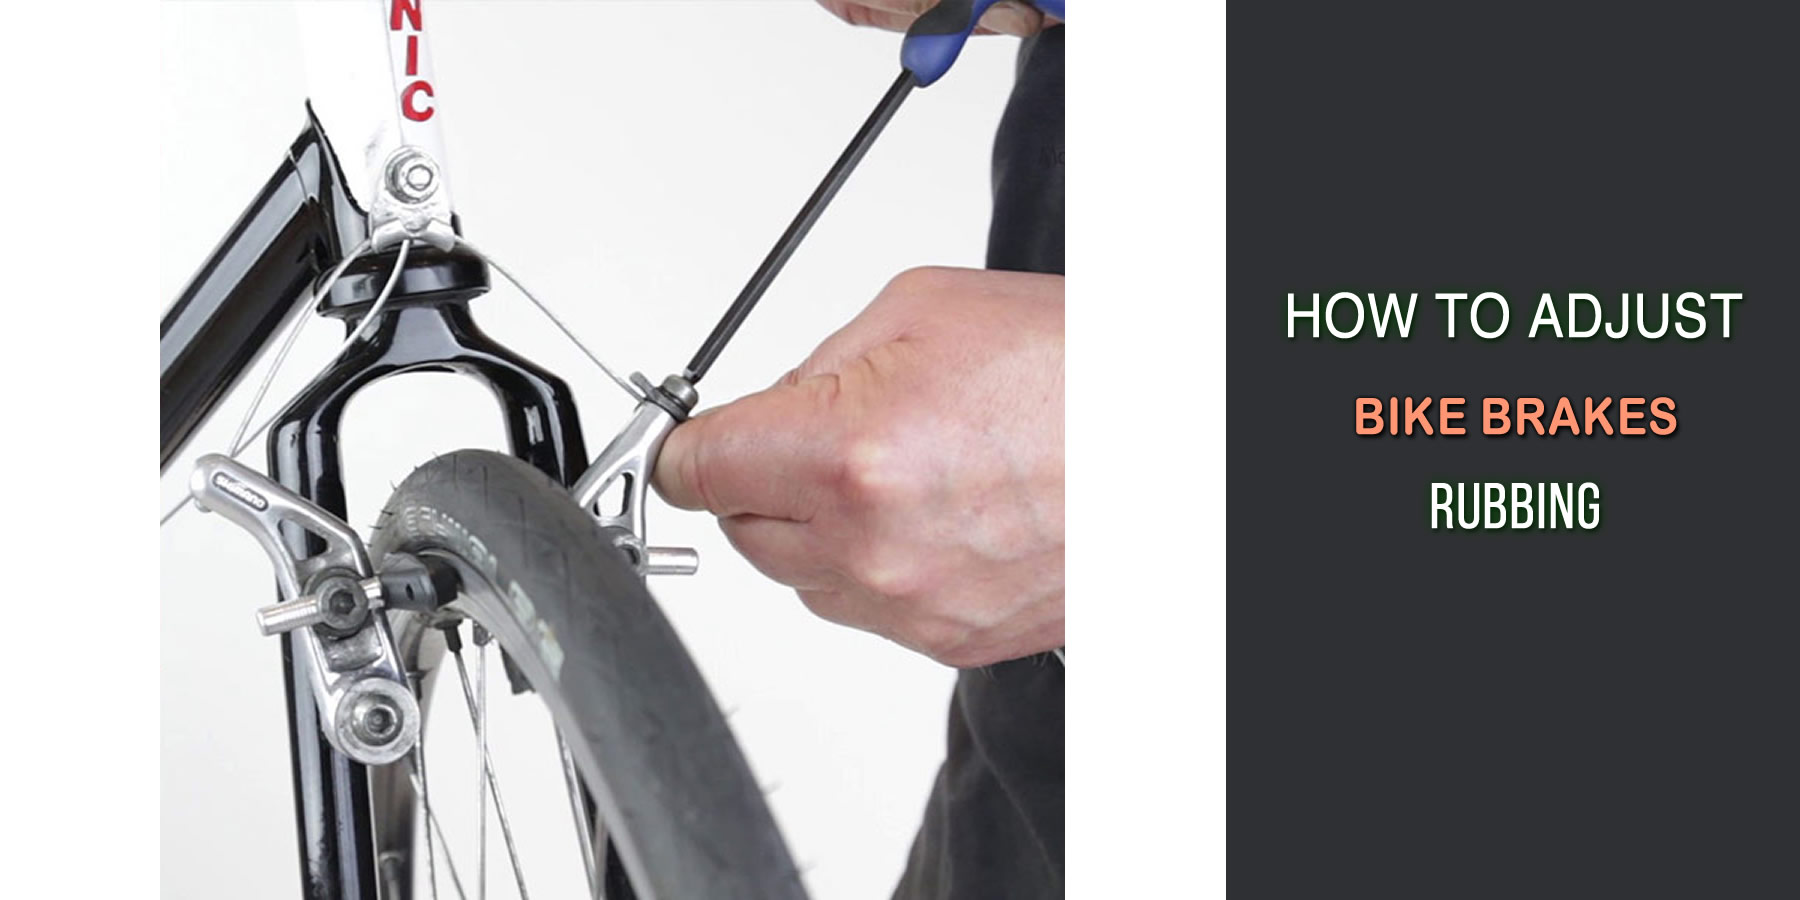 How To Adjust Bike Brakes Rubbing: 10 Effective Ways You Should Know